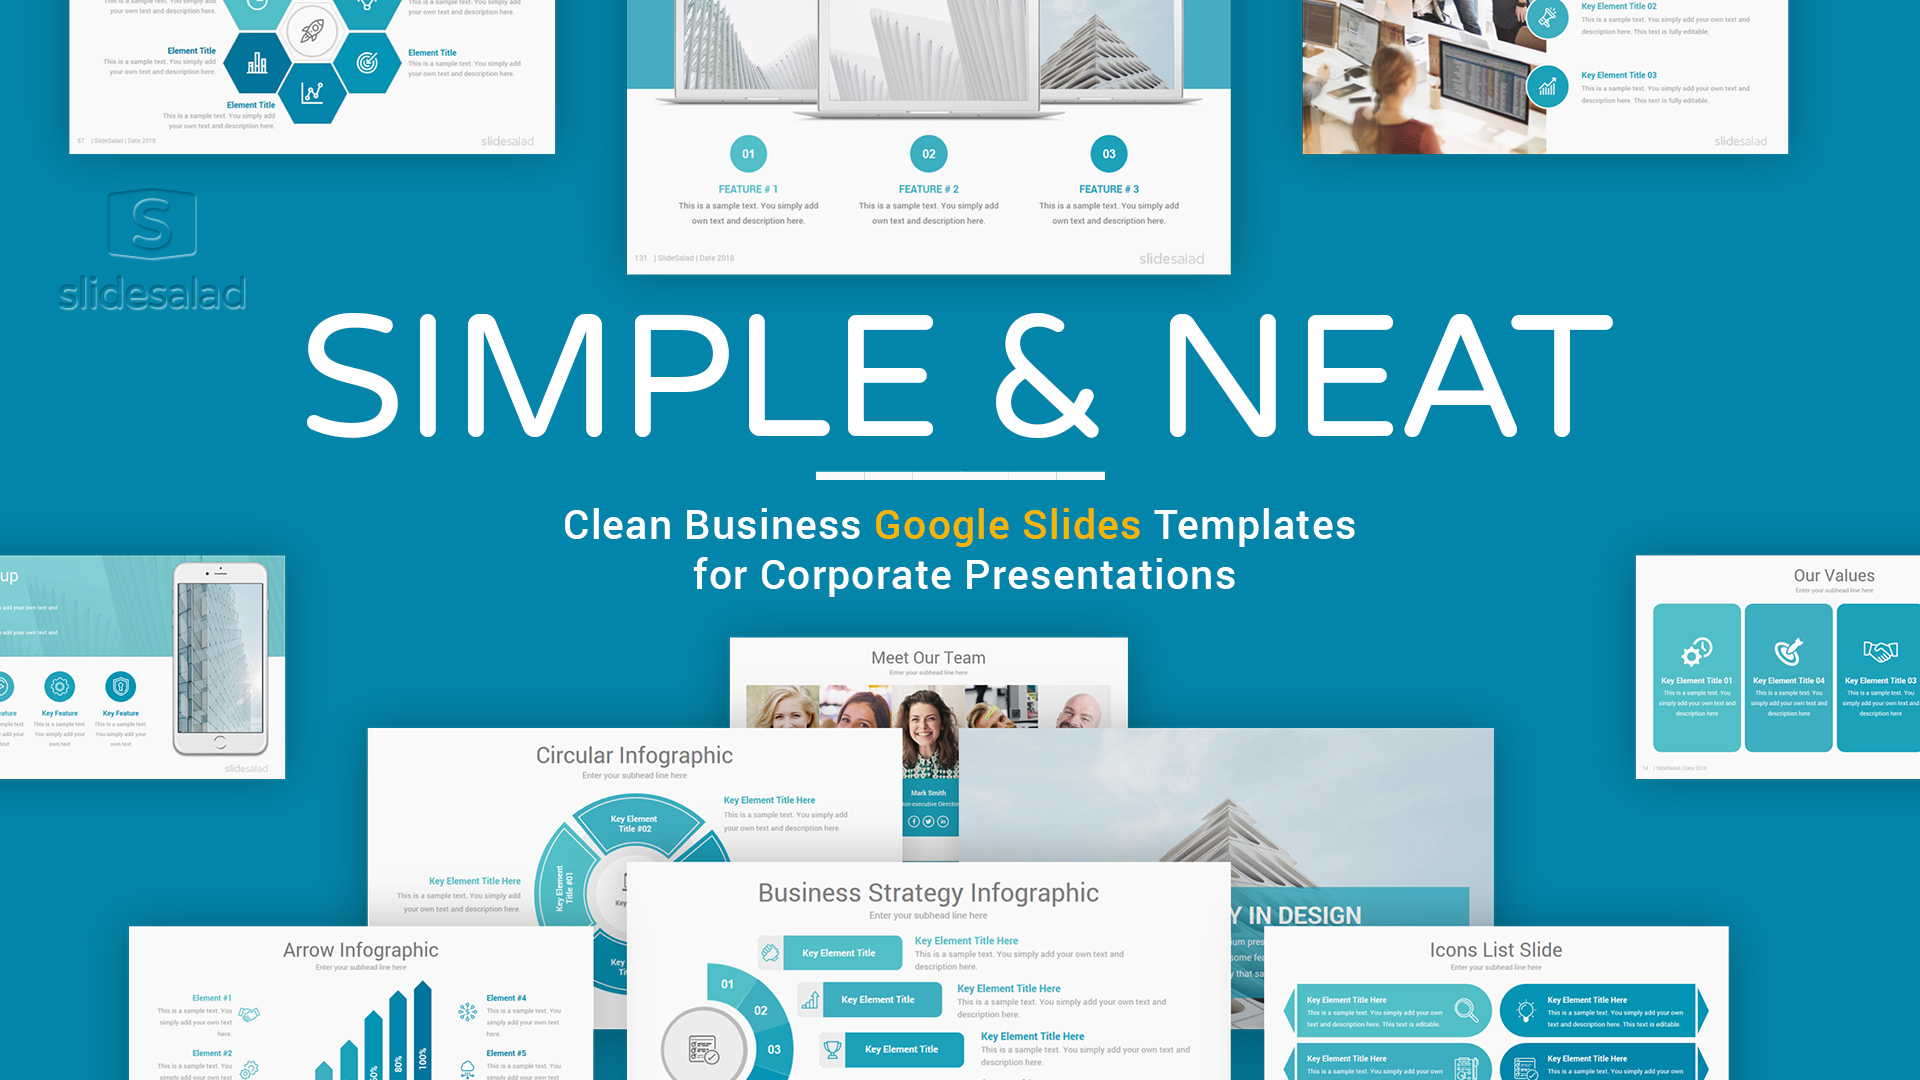 Best Simple Google Slides Presentation Template – Top-Rated & Trending Google Slides Themes for Corporate Presentations